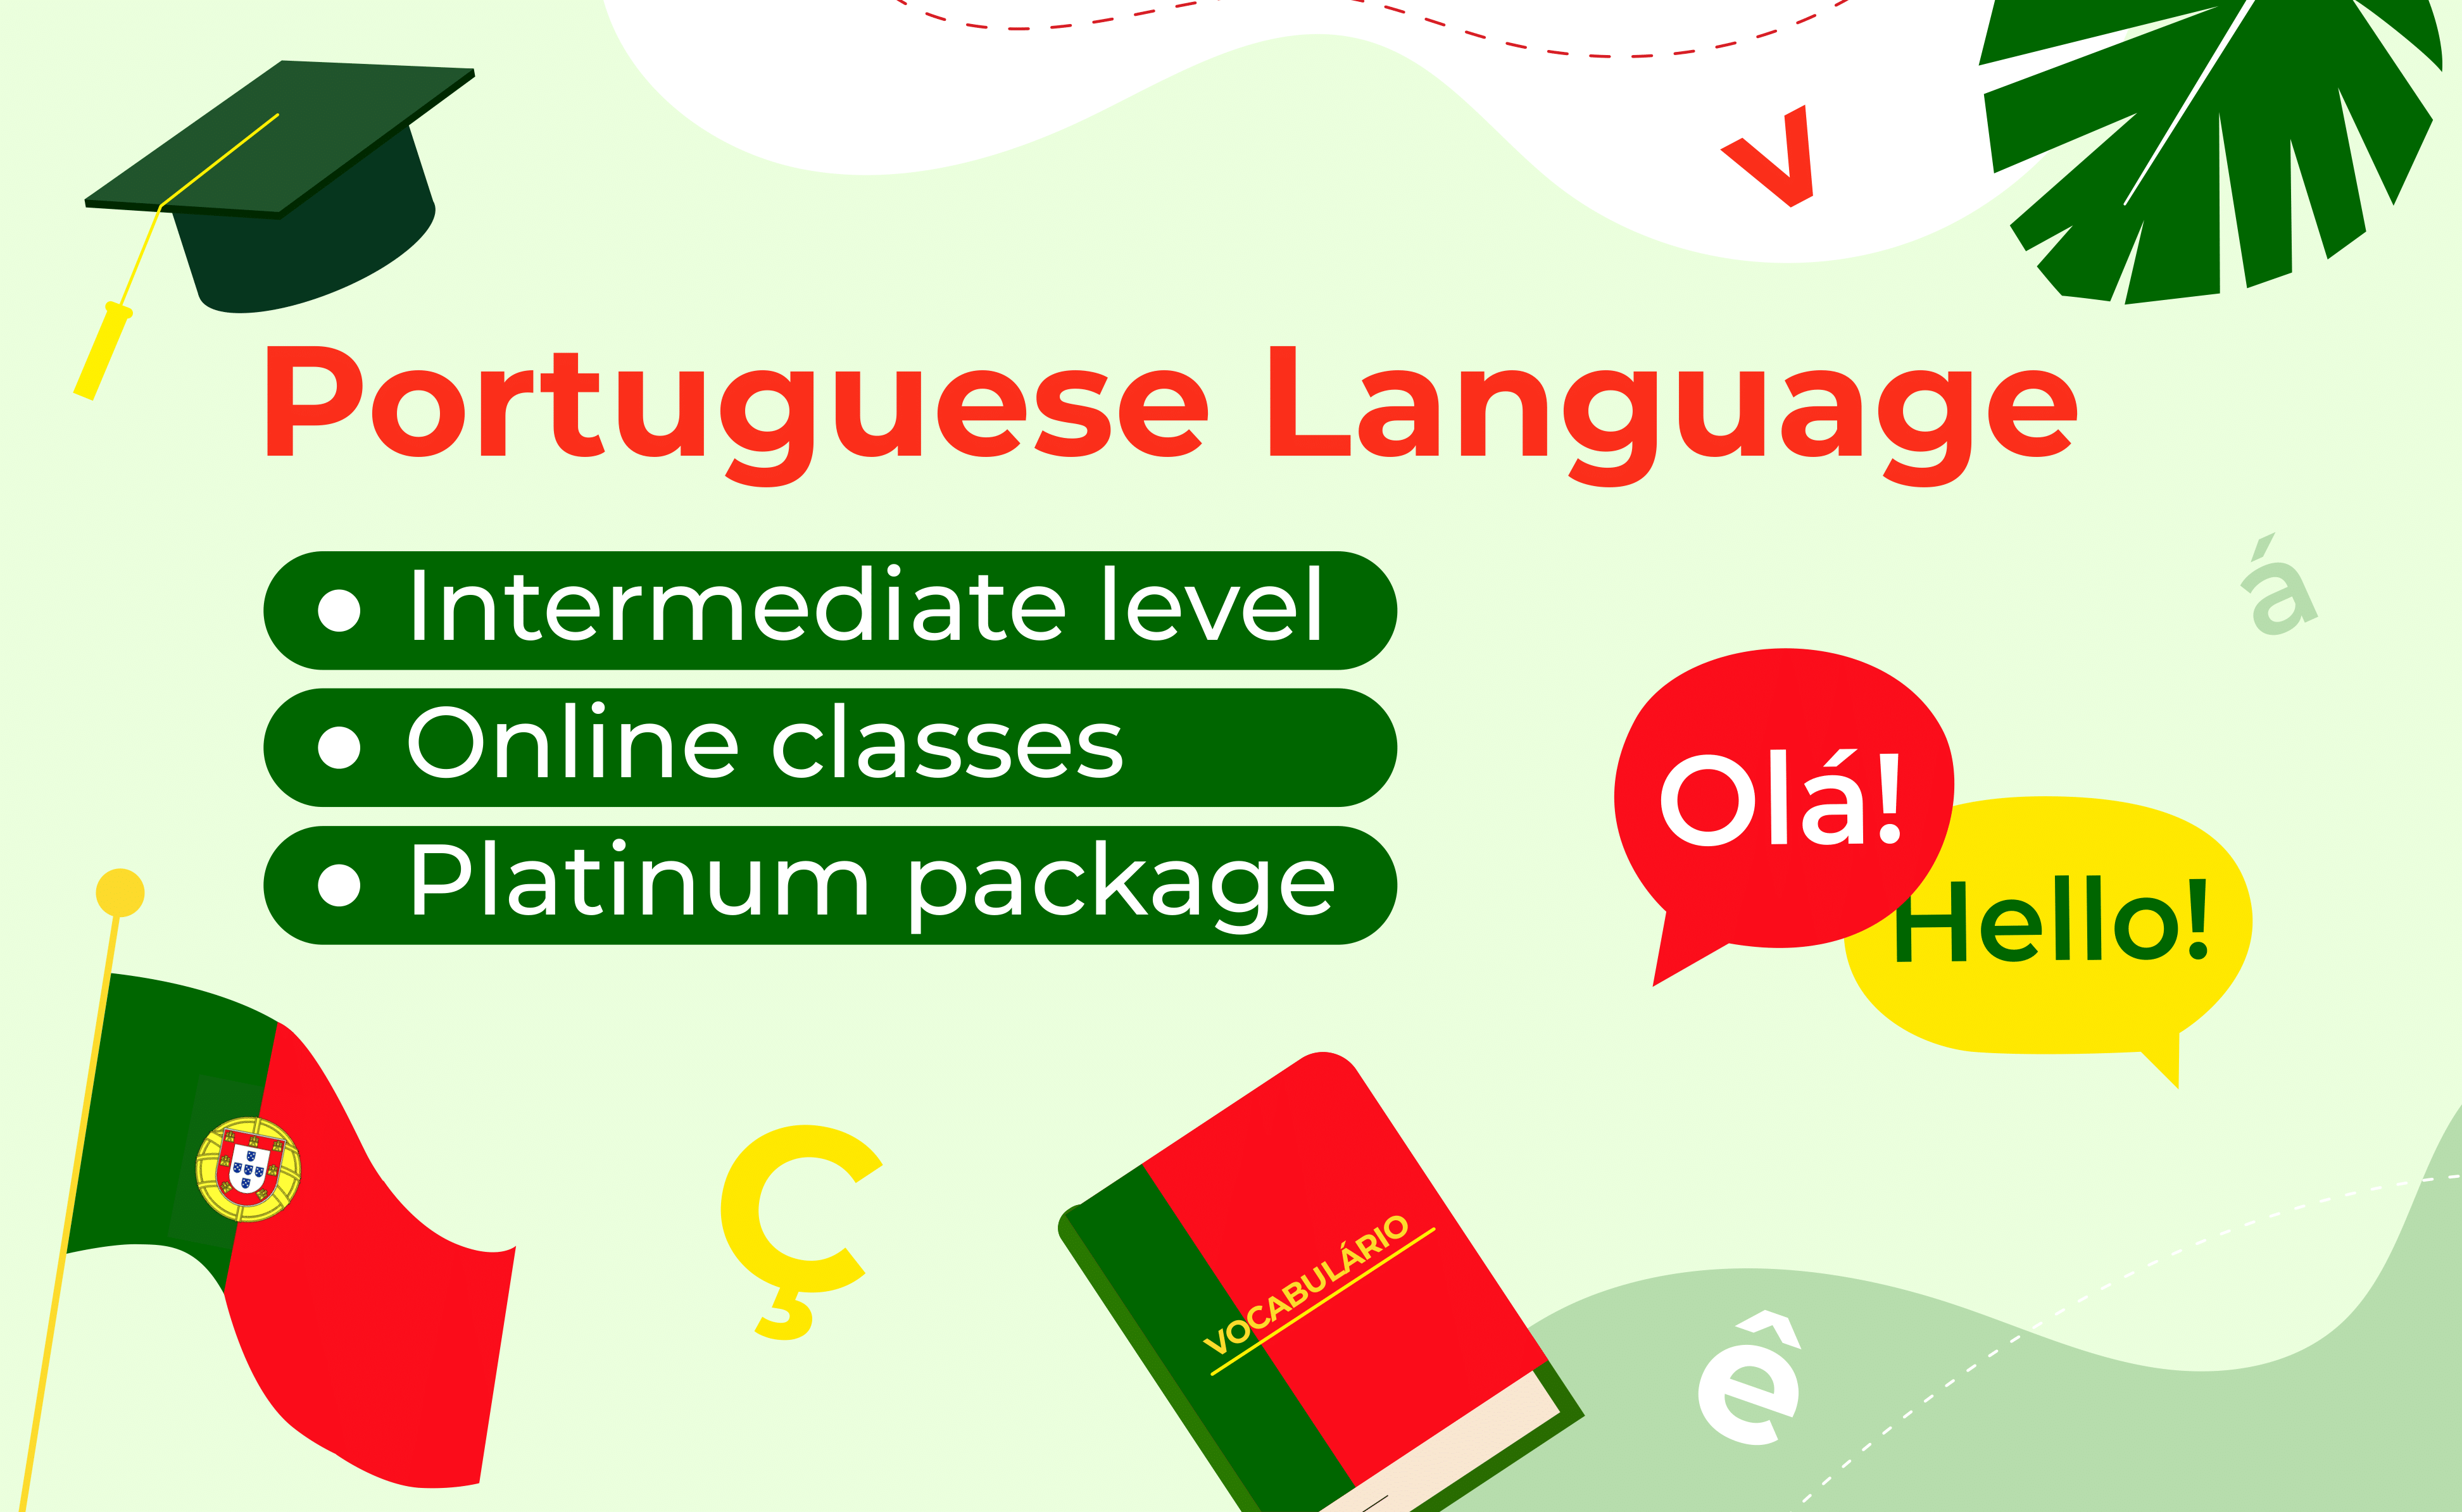 CLAS at Pitt on X: Oi! Você está interessado em aprender português? / Hi!  Are you interested in learning Portuguese? Join CLAS for a four-part  Portuguese Language Miniseries! All skill levels welcome.